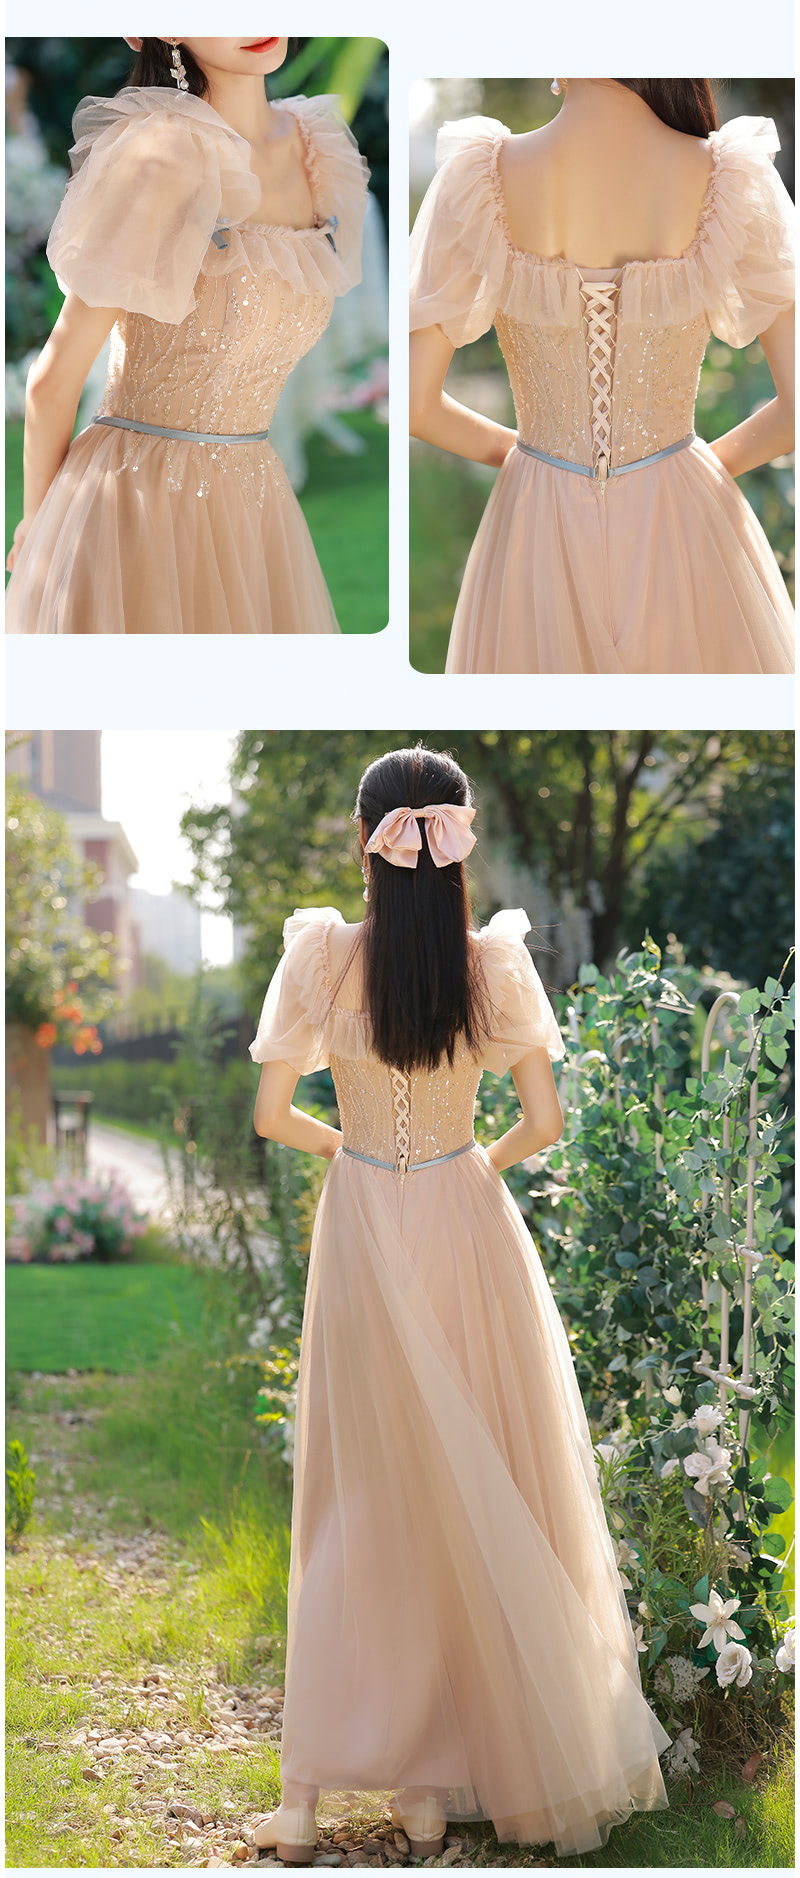 Fairy Bridesmaid Dress Wedding Guest Party Outfit Maxi Gown22